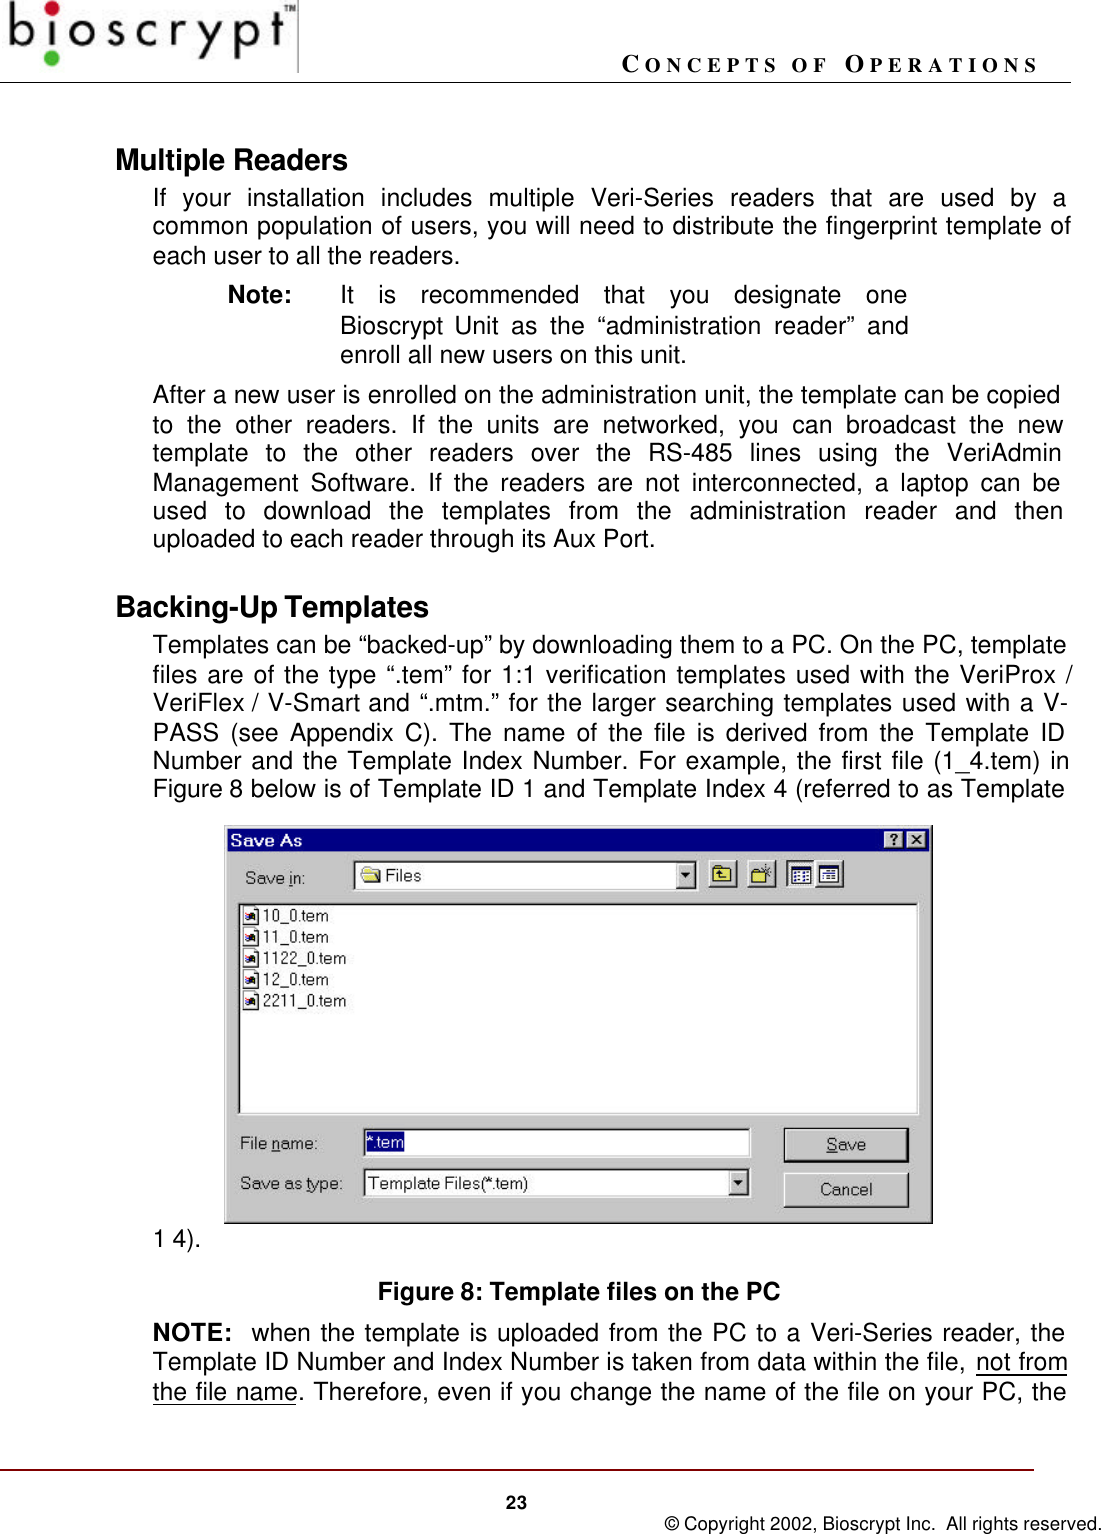 CONCEPTS OF OPERATIONS23 © Copyright 2002, Bioscrypt Inc.  All rights reserved.Multiple ReadersIf your installation includes multiple Veri-Series readers that are used by acommon population of users, you will need to distribute the fingerprint template ofeach user to all the readers.Note: It is recommended that you designate oneBioscrypt Unit as the “administration reader” andenroll all new users on this unit.After a new user is enrolled on the administration unit, the template can be copiedto the other readers. If the units are networked, you can broadcast the newtemplate to the other readers over the RS-485 lines using the VeriAdminManagement Software. If the readers are not interconnected, a laptop can beused to download the templates from the administration reader and thenuploaded to each reader through its Aux Port.Backing-Up TemplatesTemplates can be “backed-up” by downloading them to a PC. On the PC, templatefiles are of the type “.tem” for 1:1 verification templates used with the VeriProx /VeriFlex / V-Smart and “.mtm.” for the larger searching templates used with a V-PASS (see Appendix C). The name of the file is derived from the Template IDNumber and the Template Index Number. For example, the first file (1_4.tem) inFigure 8 below is of Template ID 1 and Template Index 4 (referred to as Template1 4).Figure 8: Template files on the PCNOTE:  when the template is uploaded from the PC to a Veri-Series reader, theTemplate ID Number and Index Number is taken from data within the file, not fromthe file name. Therefore, even if you change the name of the file on your PC, the